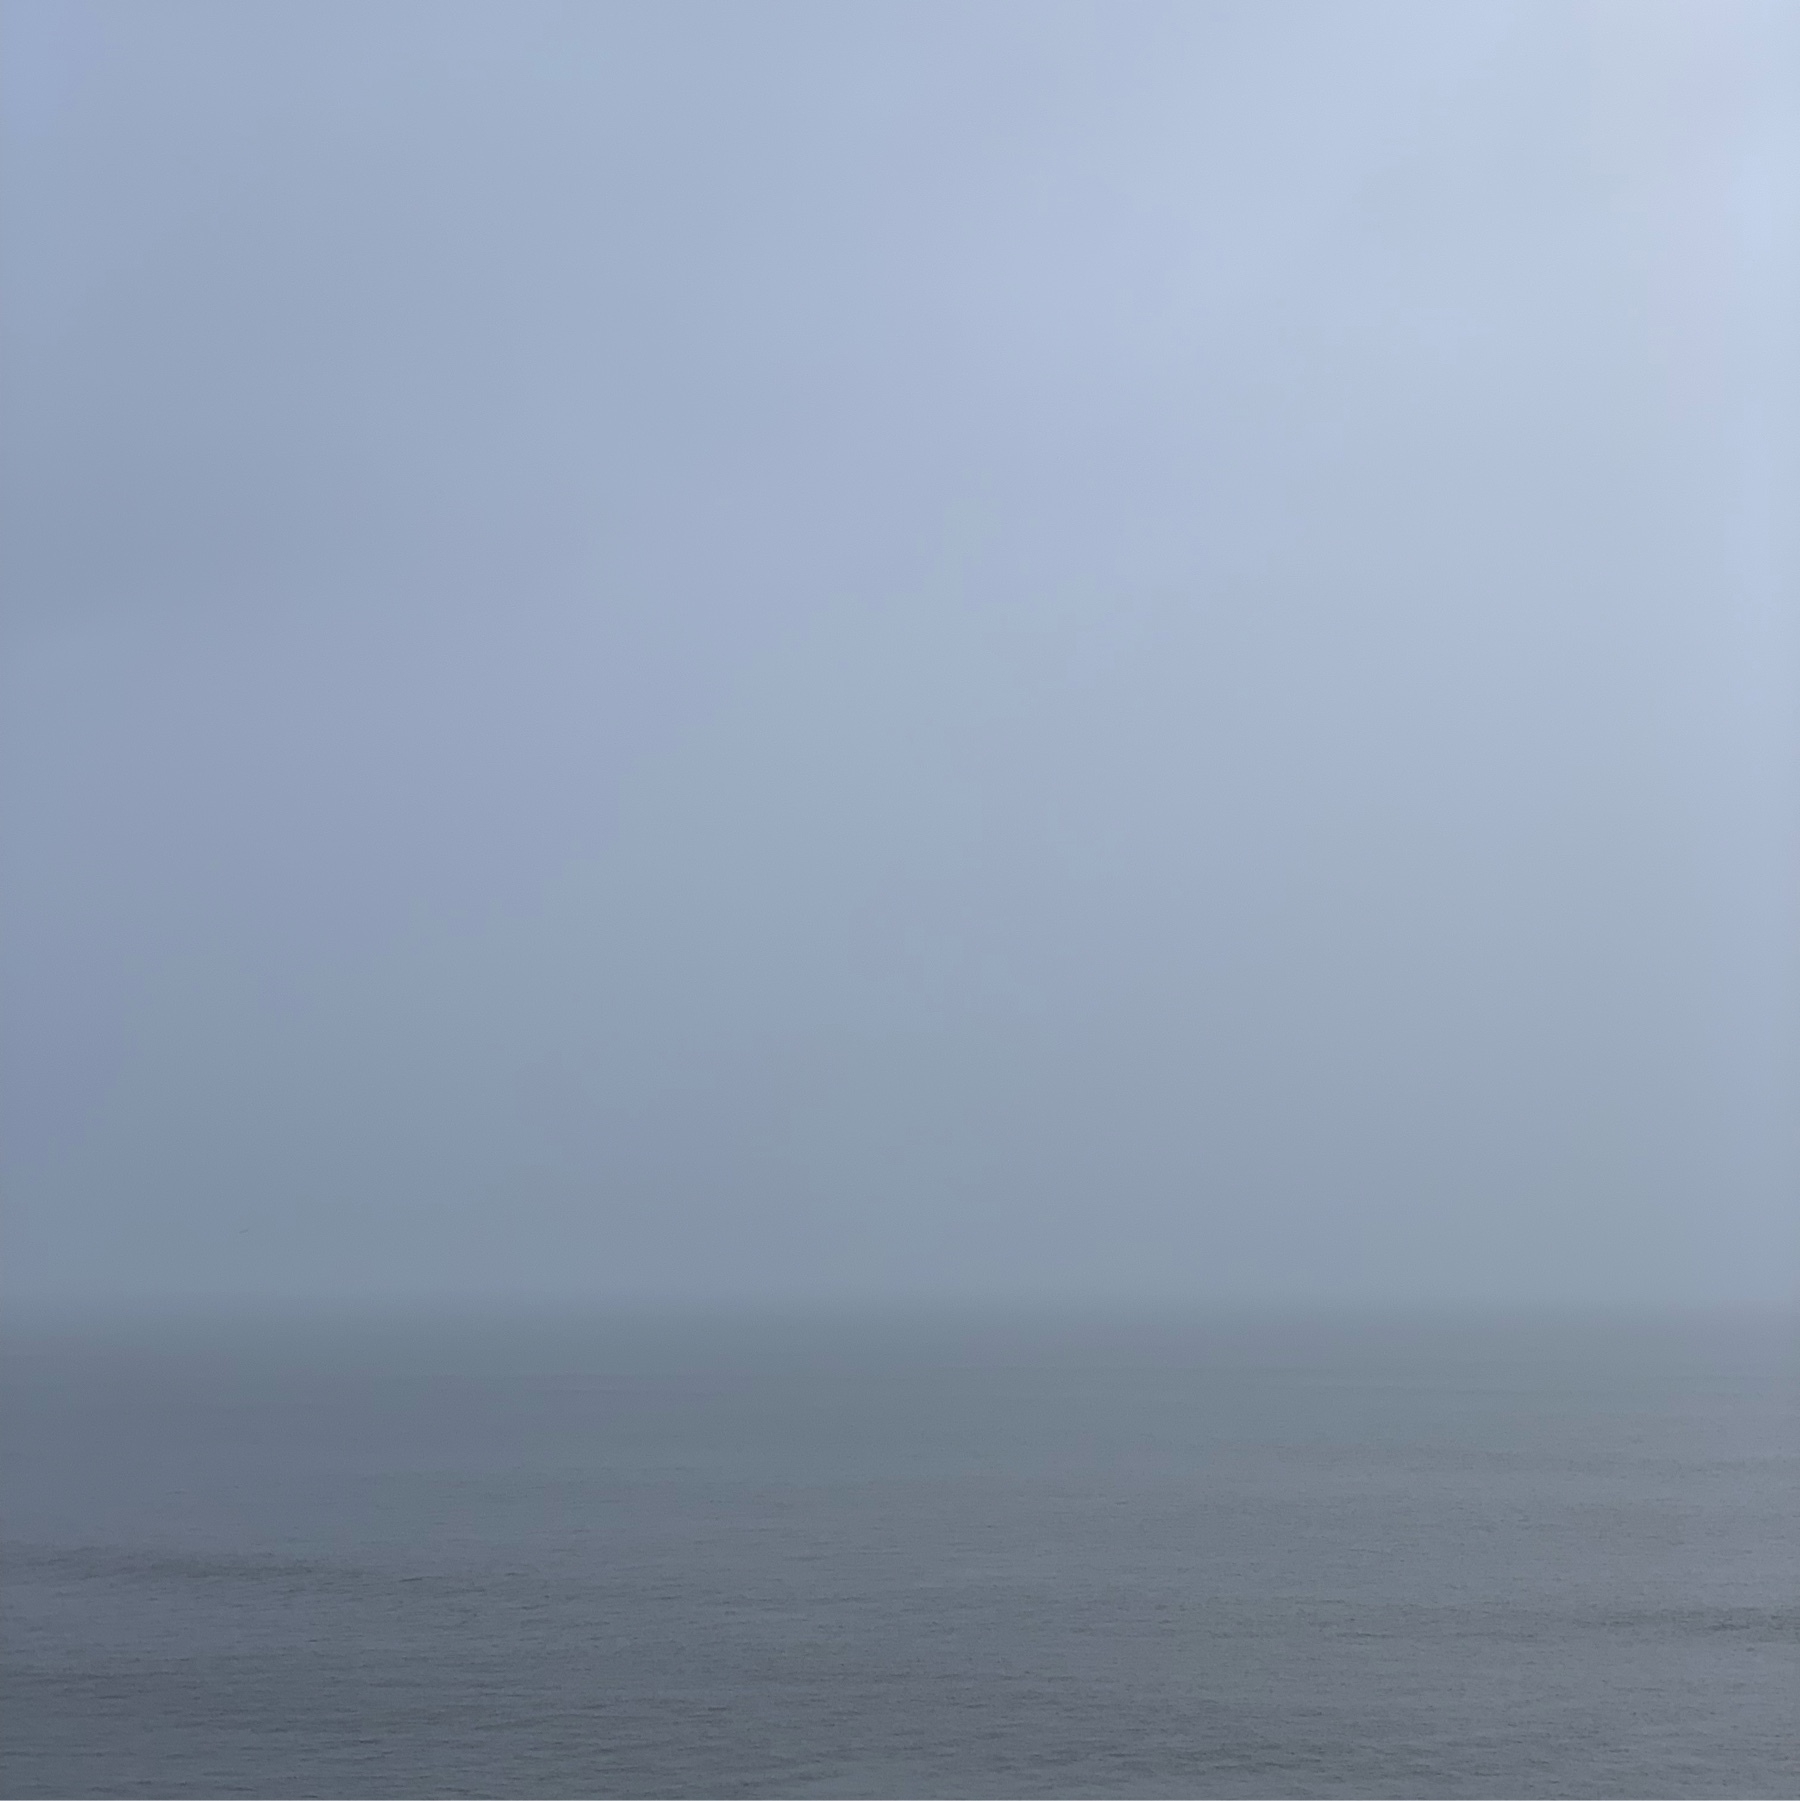 A foggy day looking out to sea. both sky and water are various shades of grey